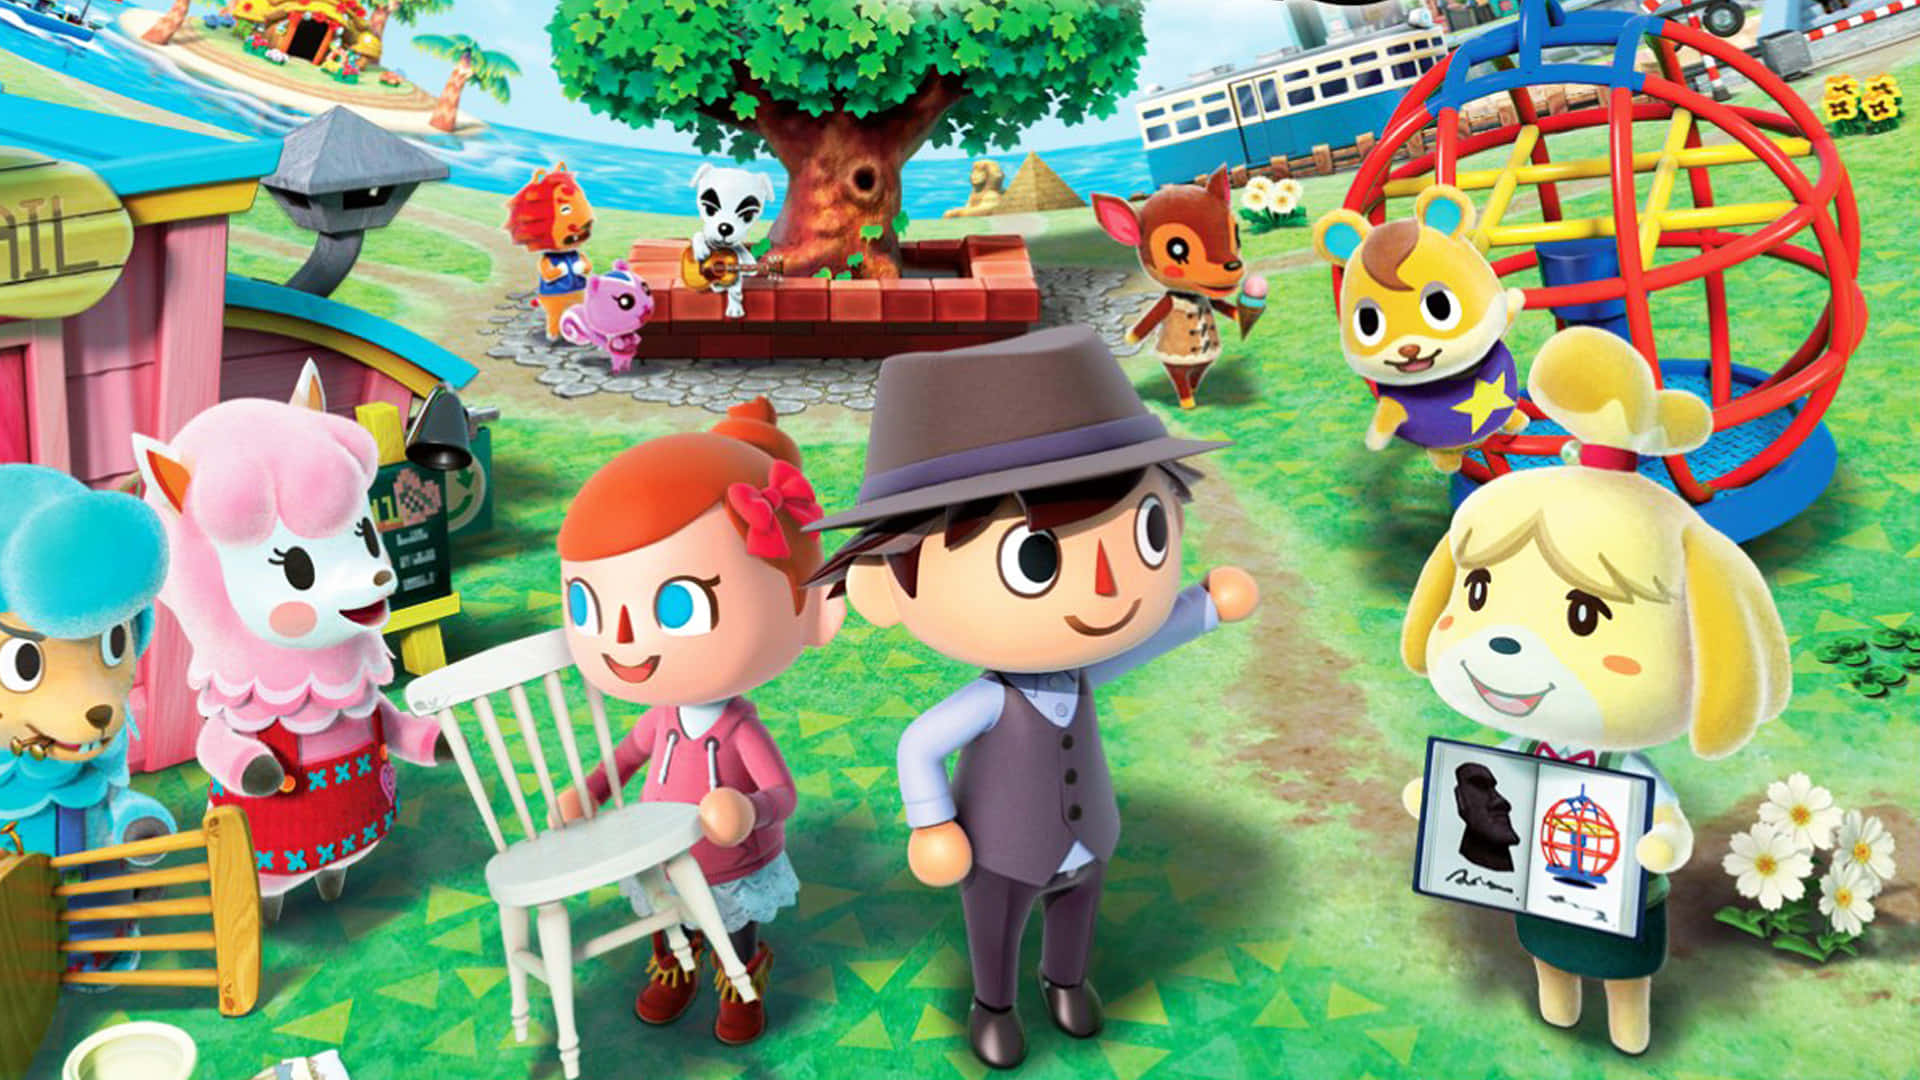 Ready to explore rest of summer in "Animal Crossing: New Horizons"!